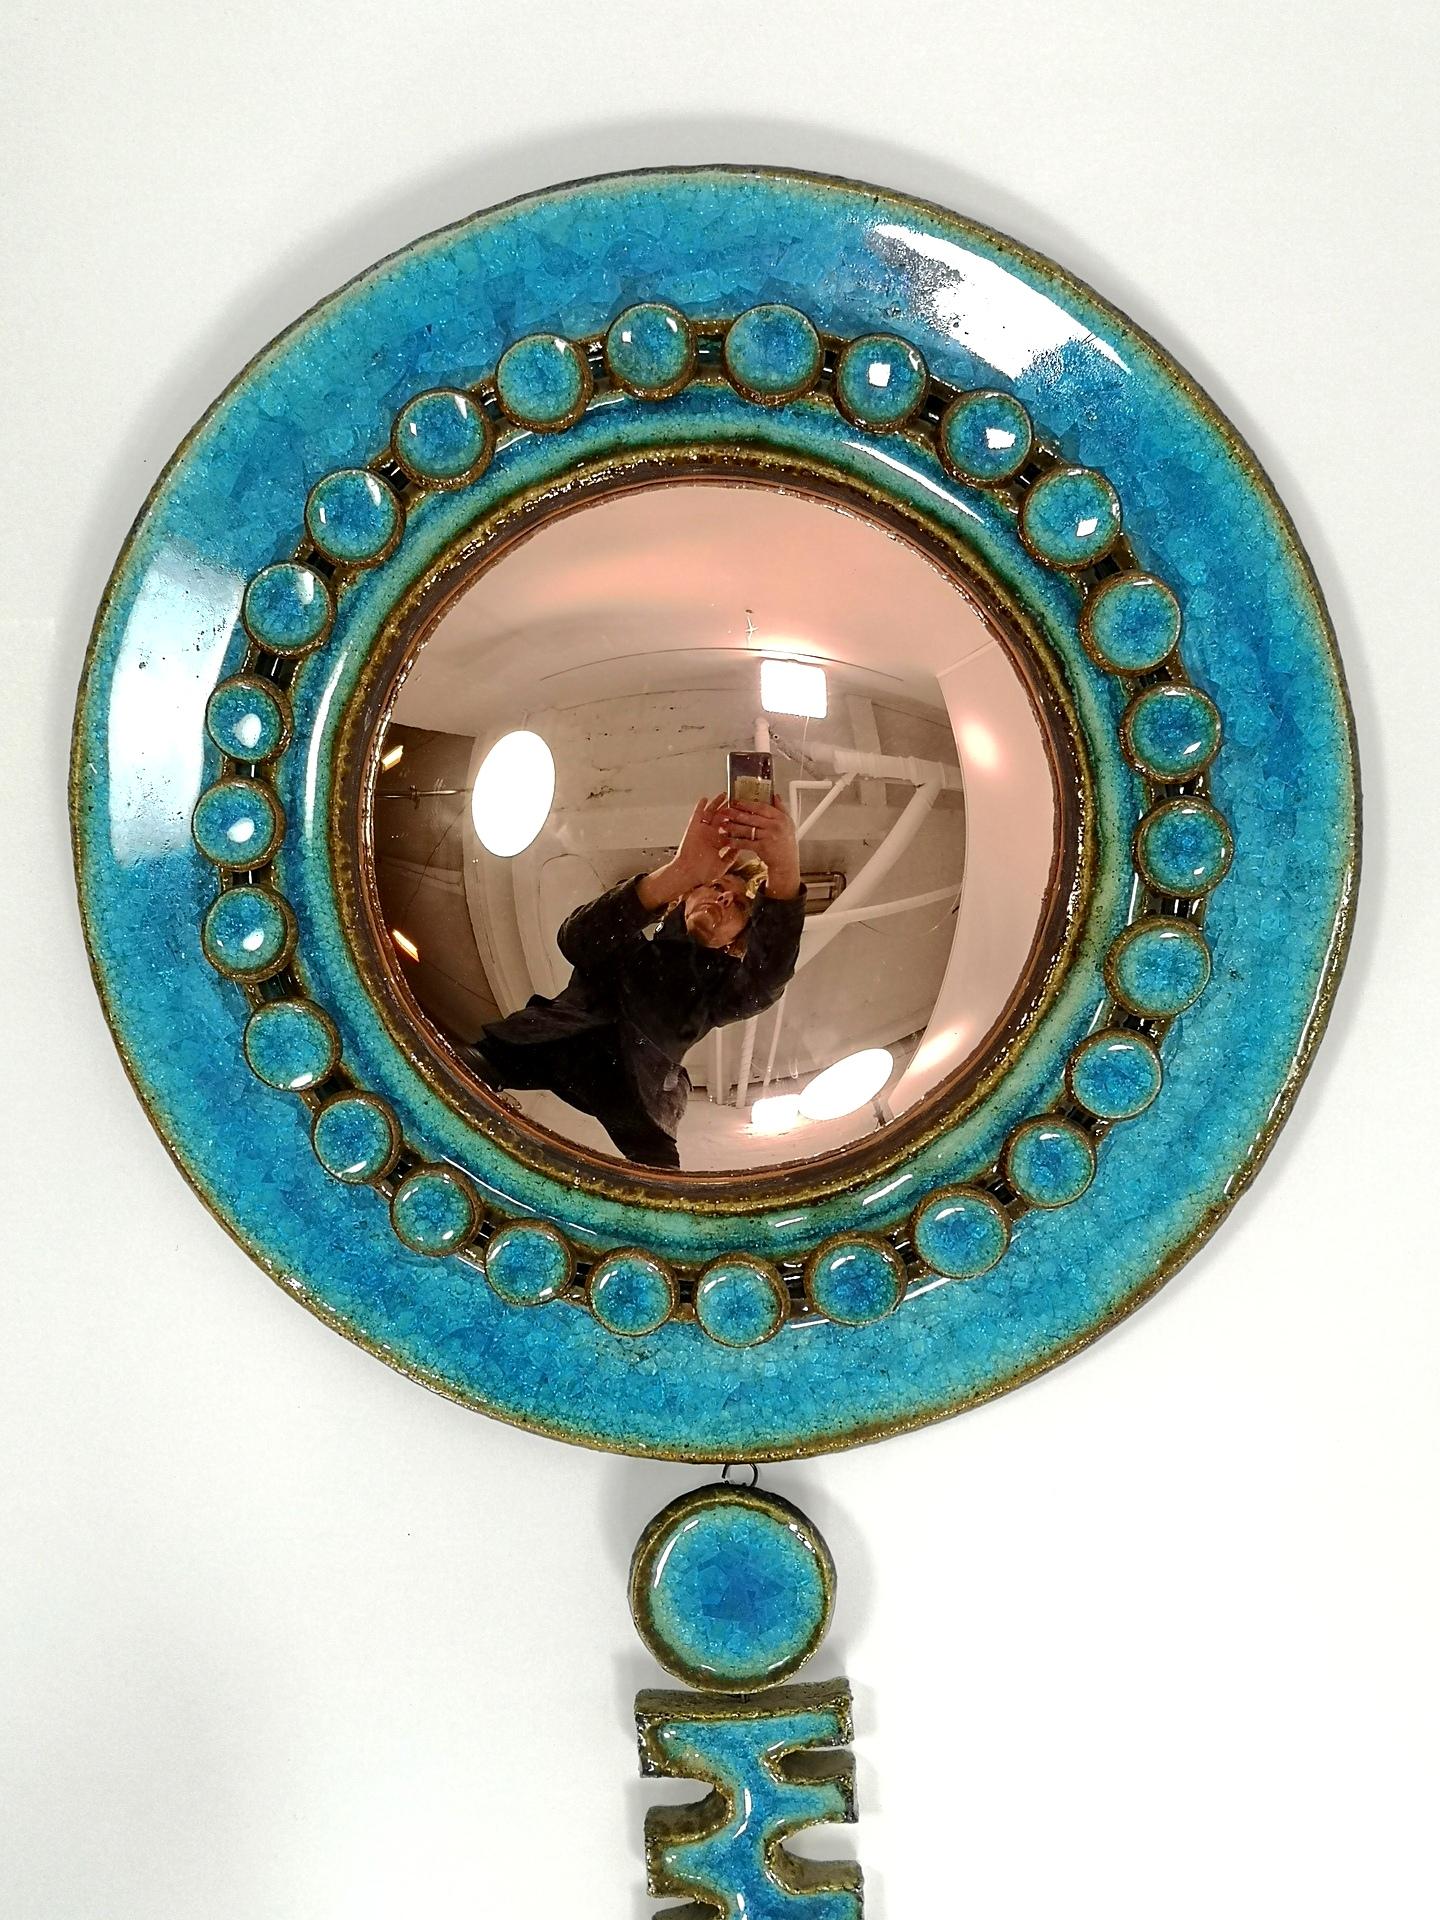 This vintage designer piece, signed by renowned Hungarian ceramist Gyula Vegvari is must-have for any serious collector with an appreciation for Eastern European mid-century ceramic art. The unusual shape and large size of this wall mirror dominates